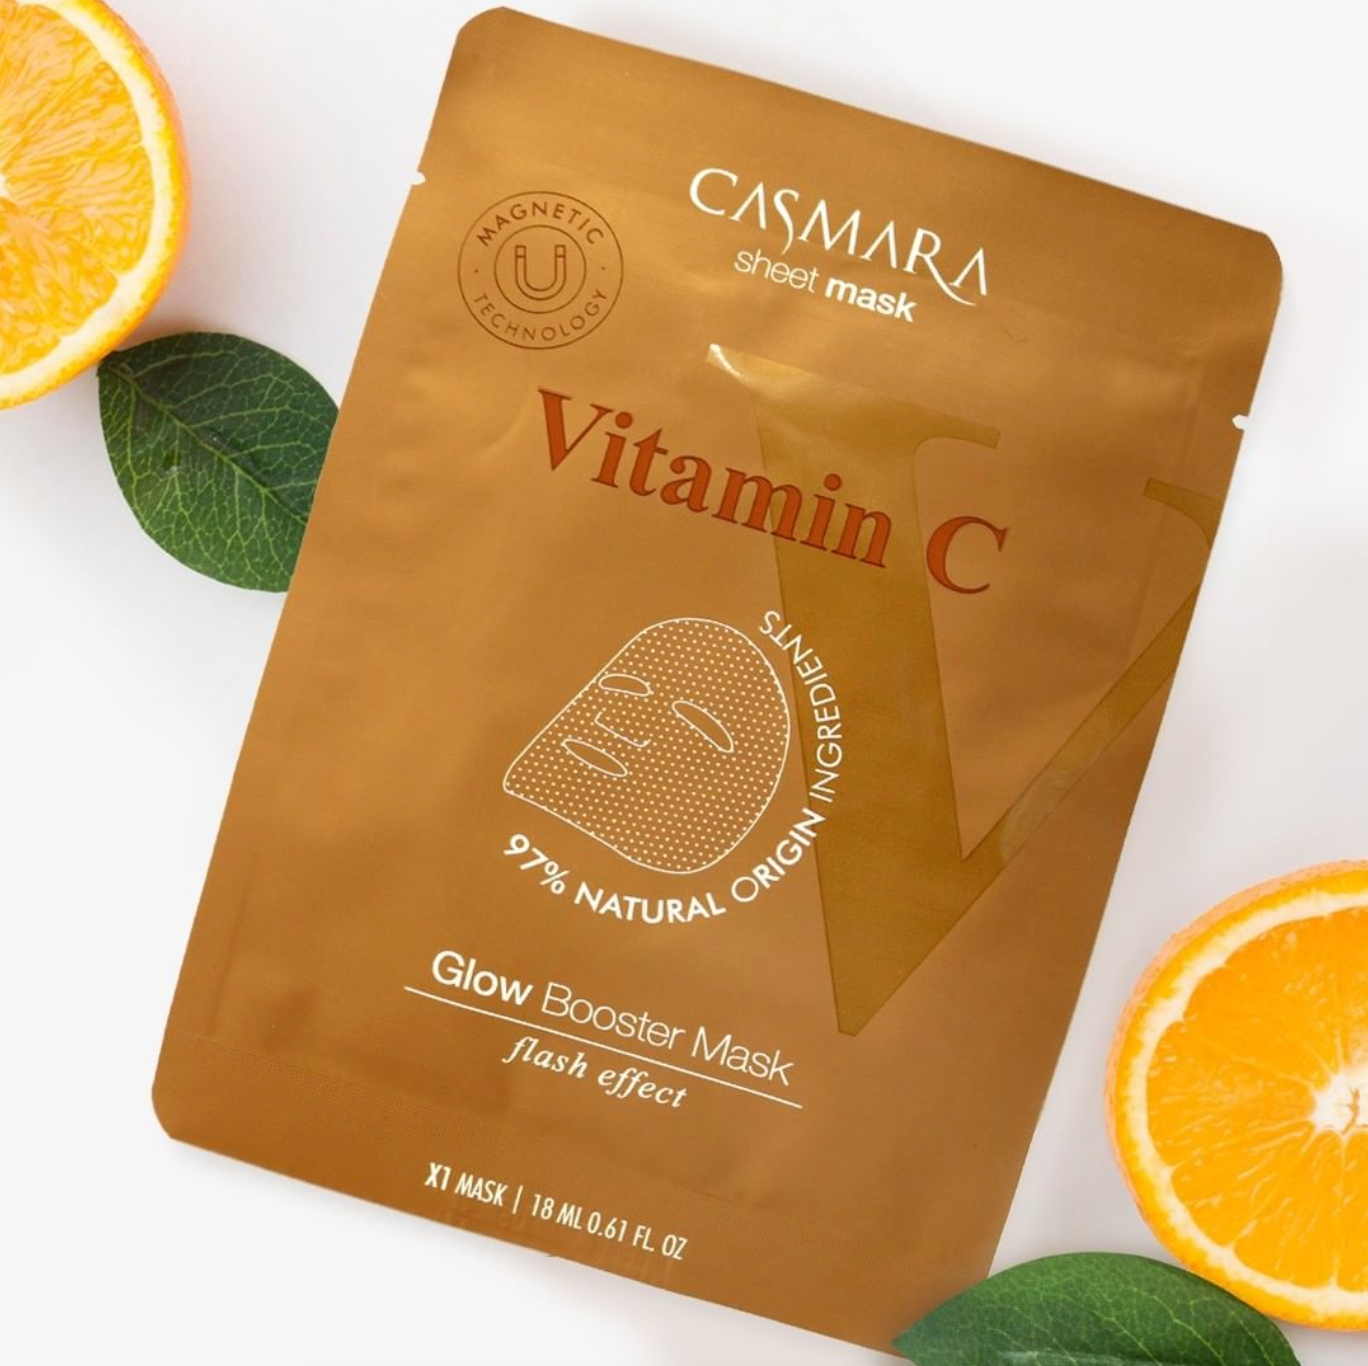 Glow Booster Mask